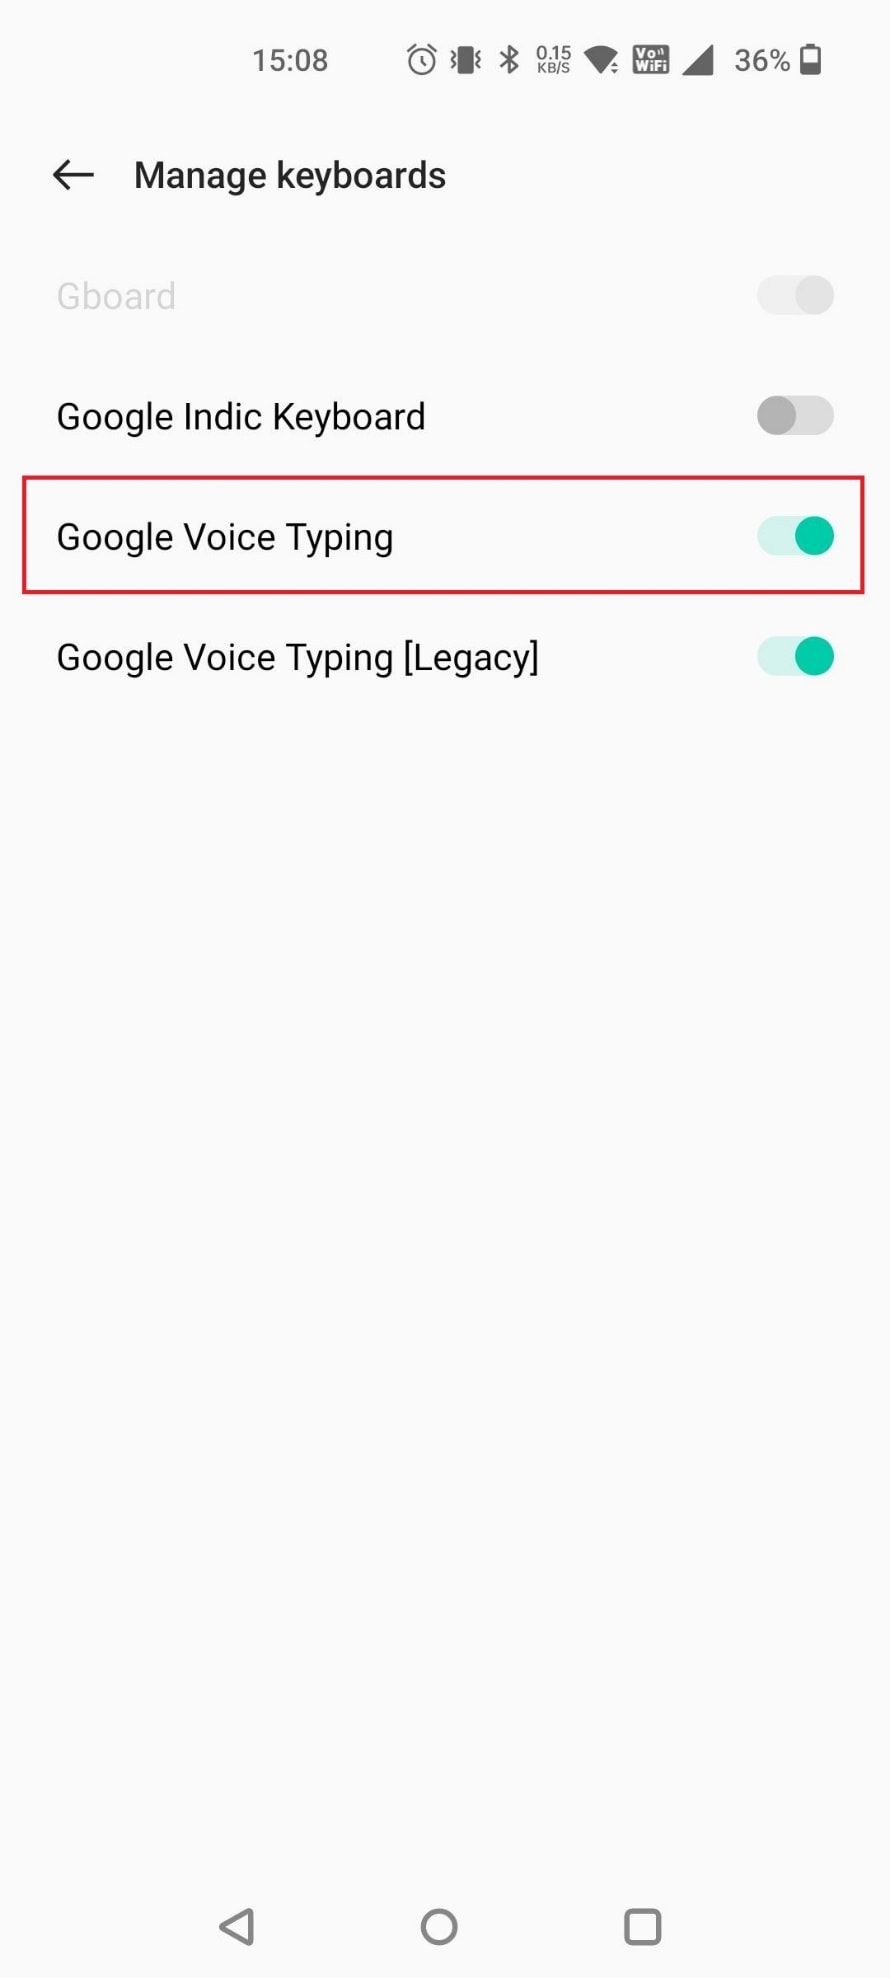 Turn off the toggle for the Google Voice Typing option